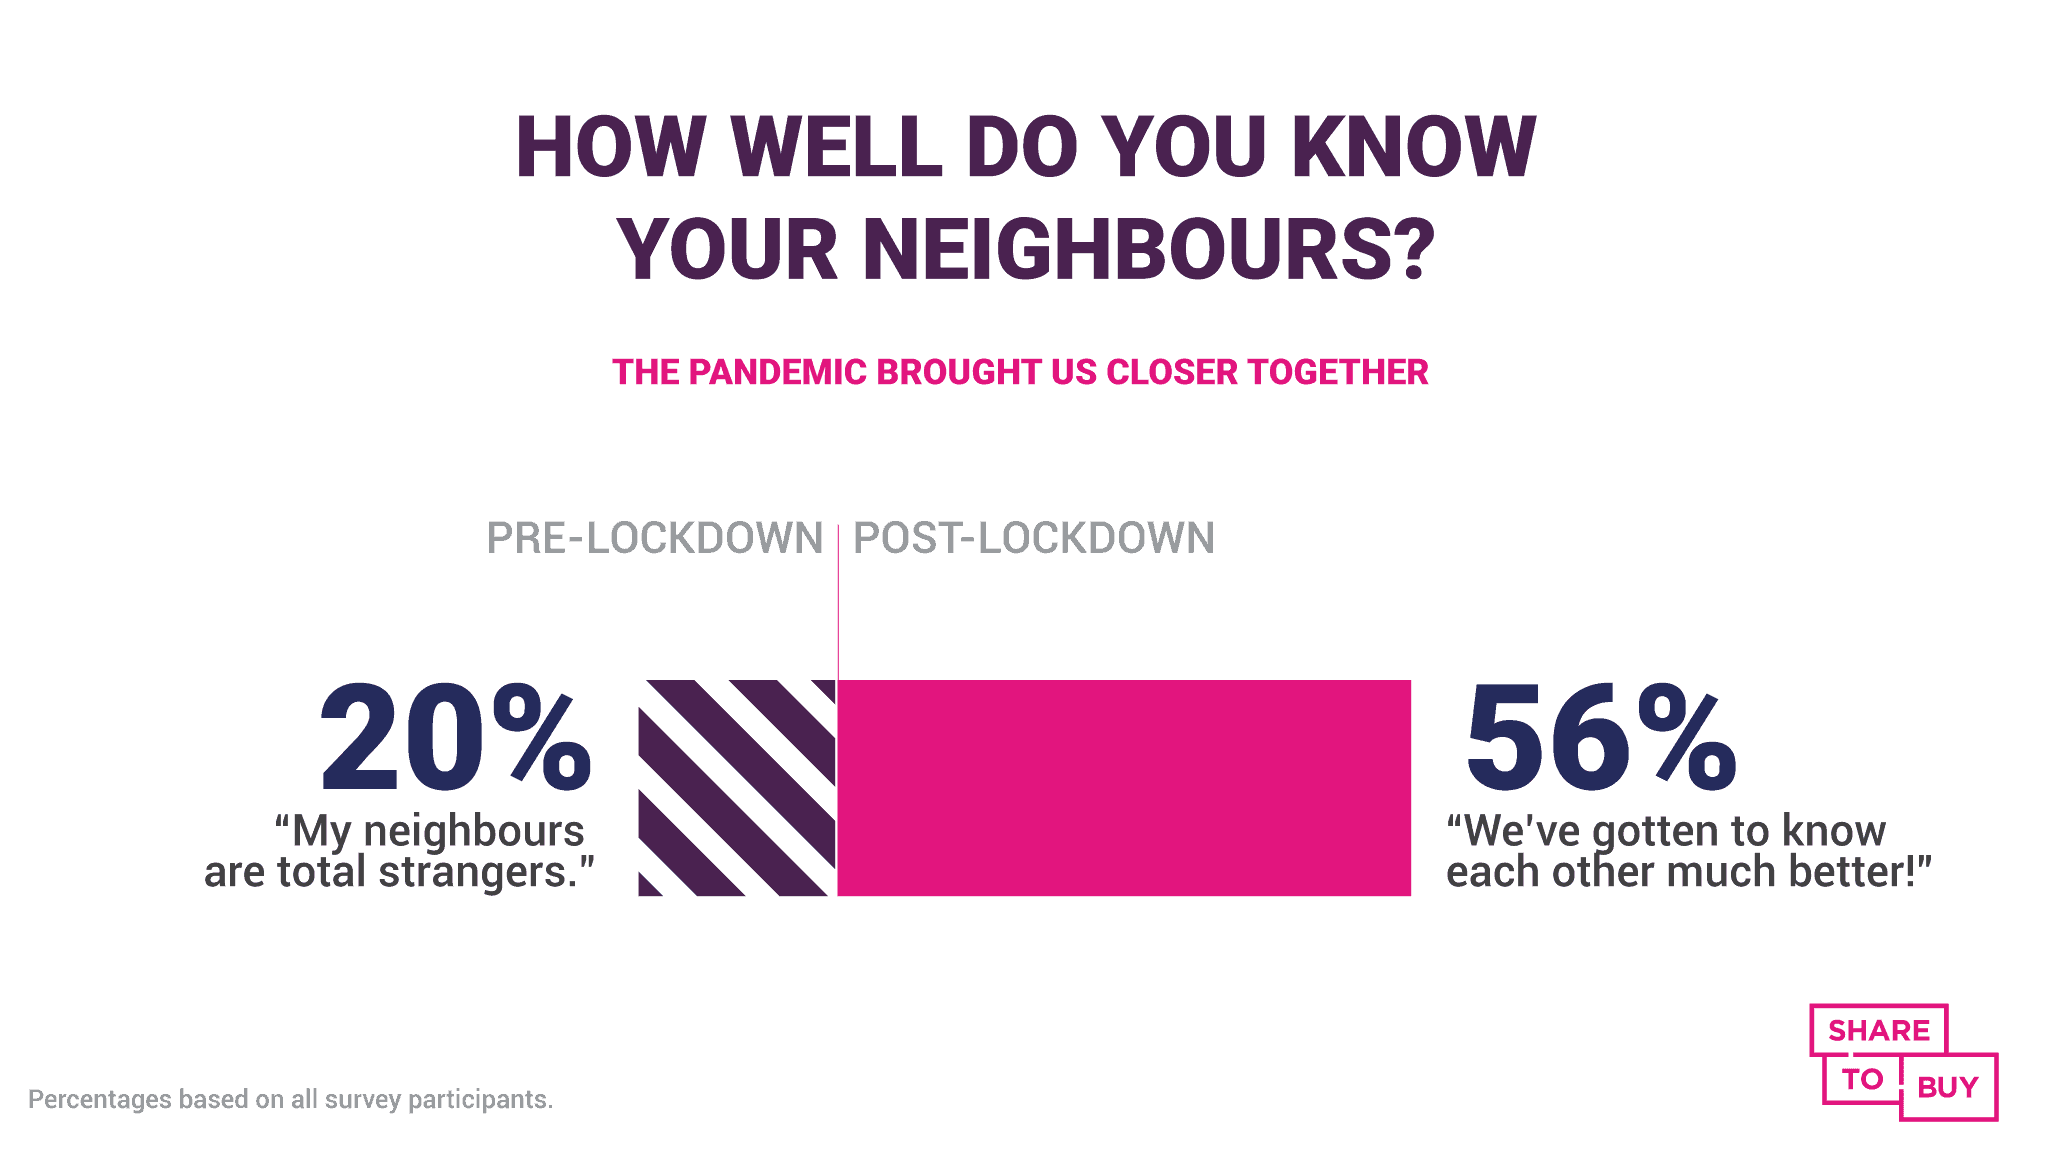 A graphic showing that 56% of Brits feel closer to their neighbours since lockdown